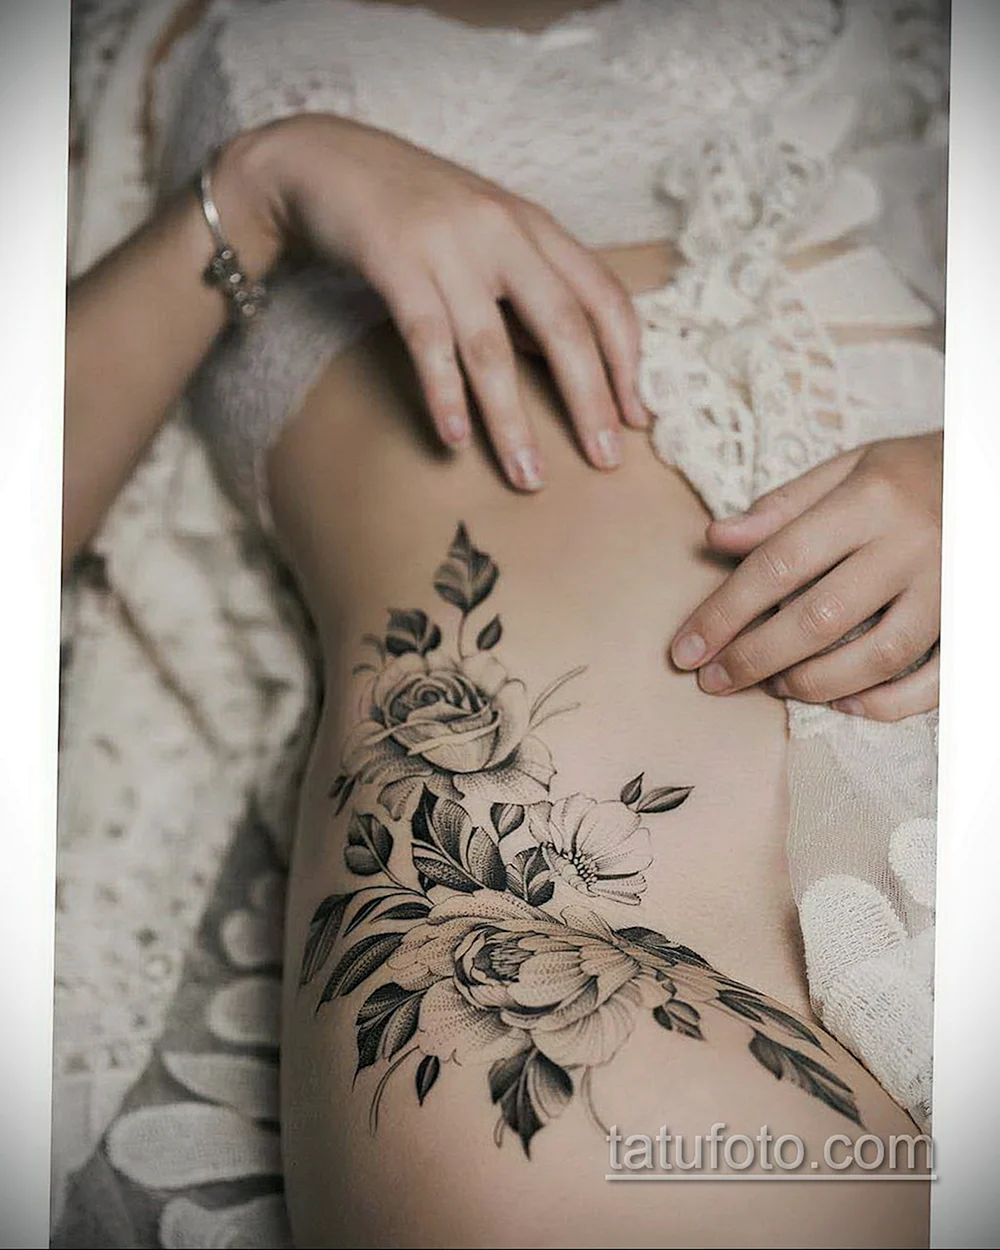 Intimate Tattoos for women